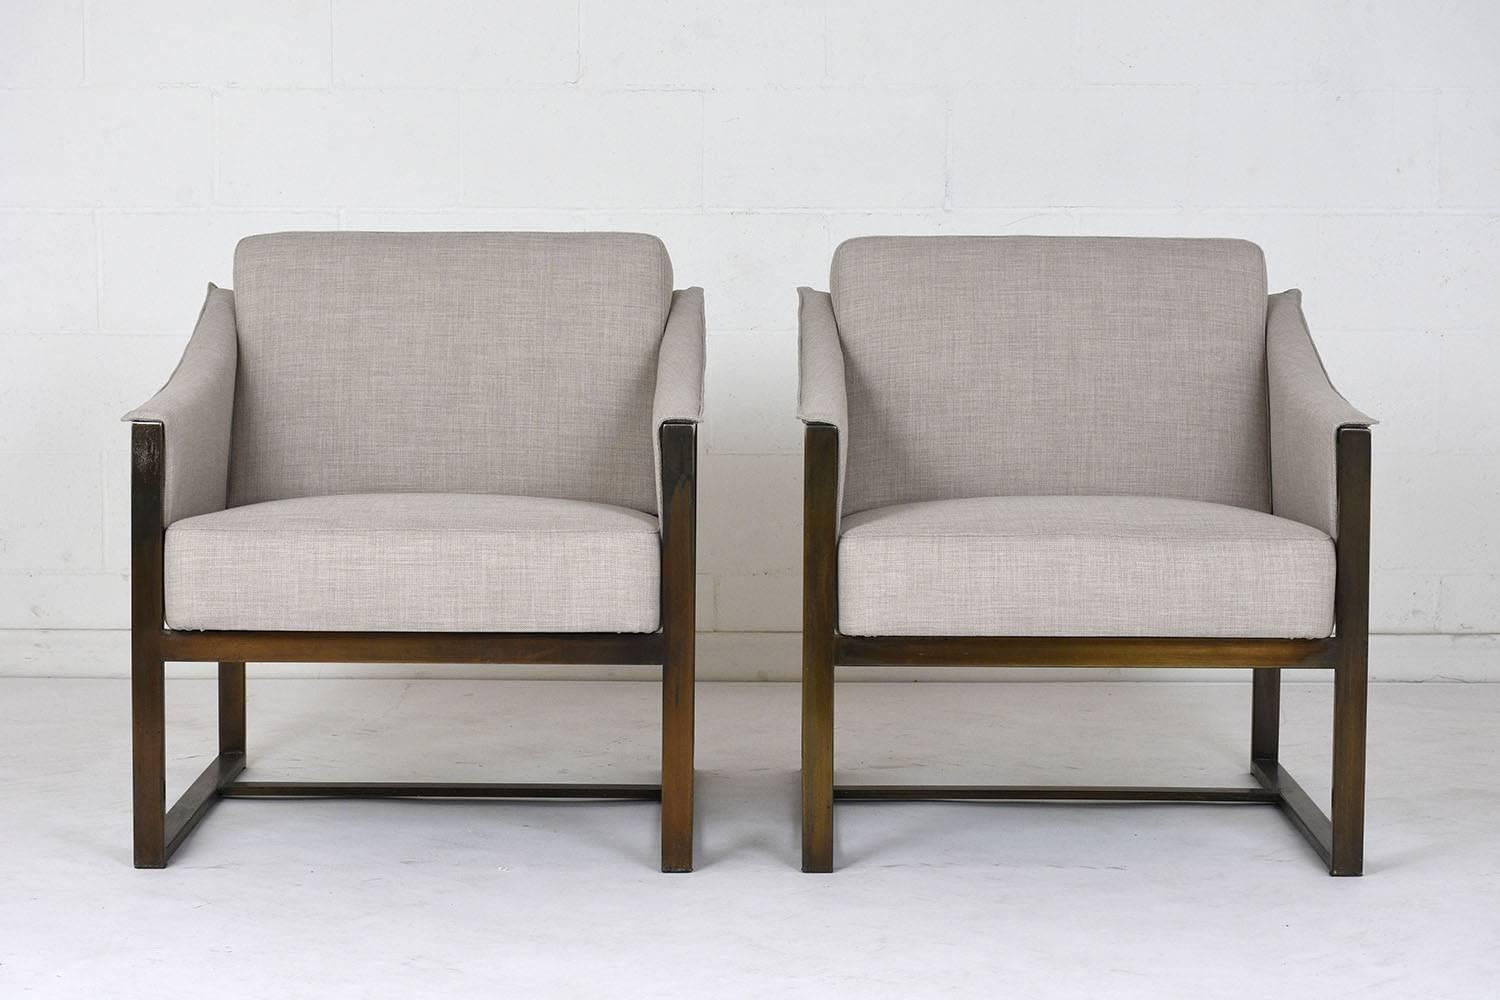 This pair of 1960s Mid-Century Modern-style lounge chairs is designed by Milo Baughman. The chairs feature geometric brass frames have curved arm rests and stretched legs. The comfortable seats have been completely restored with new upholstery and